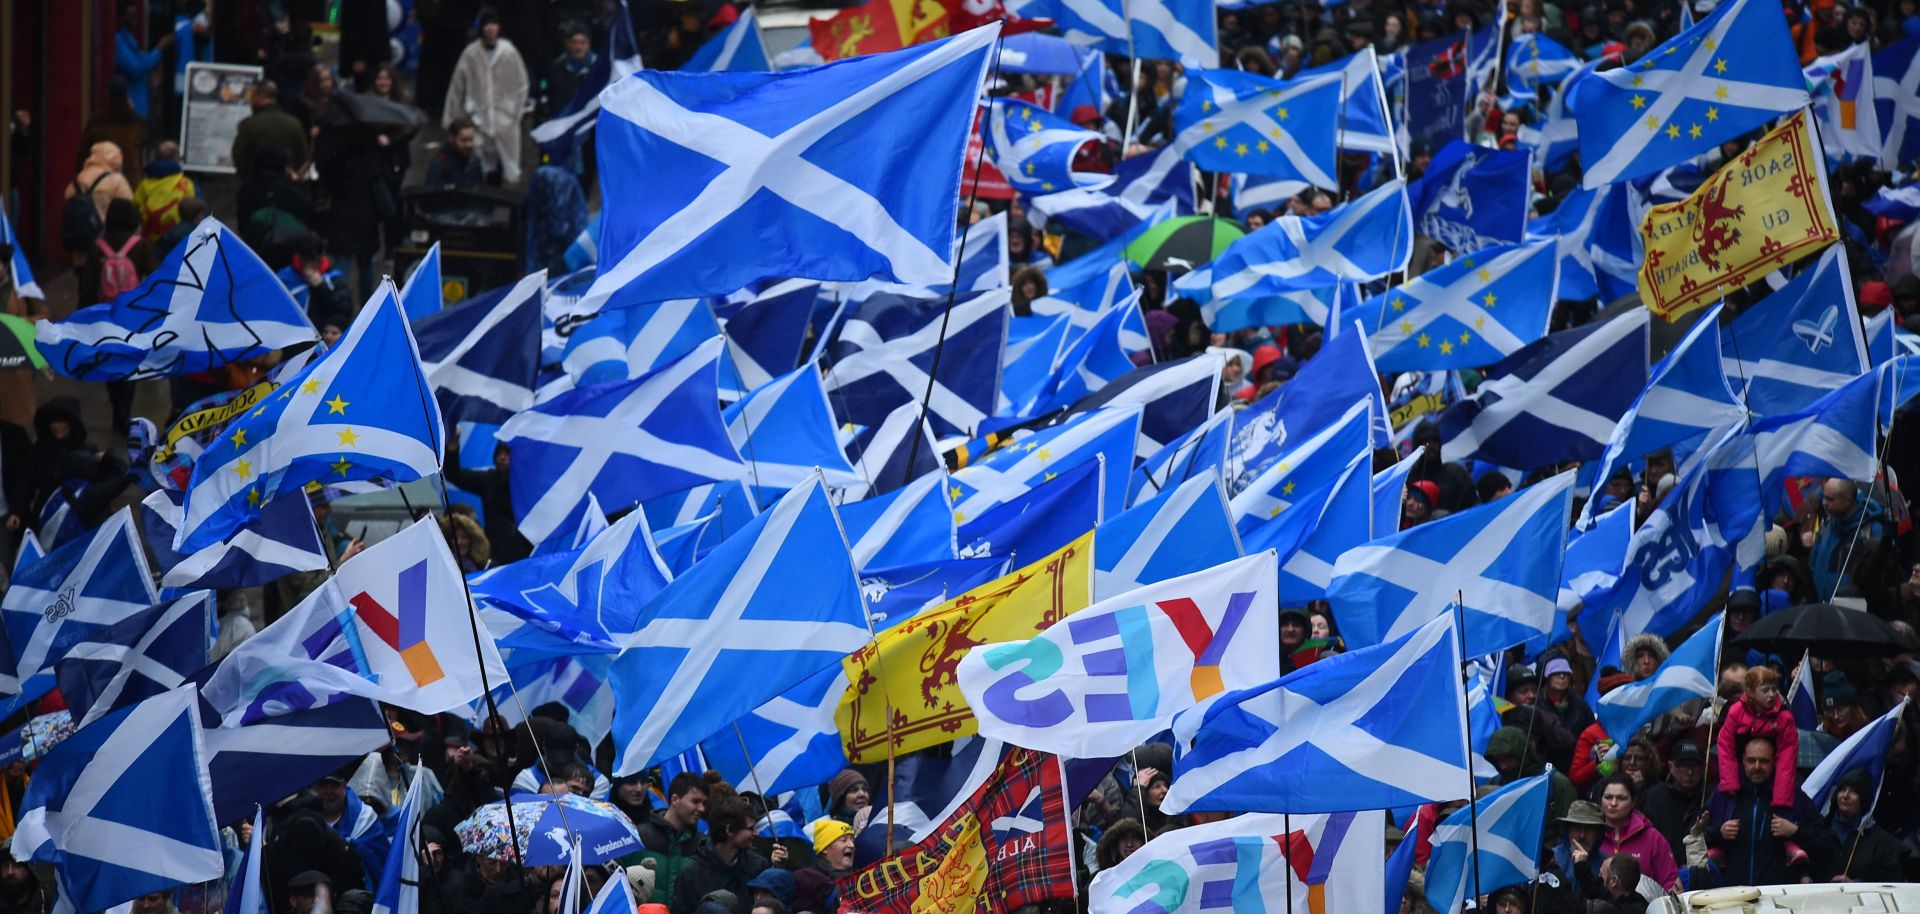 Protesters calling for Scottish independence on Jan. 11, 2020, in Glasgow.